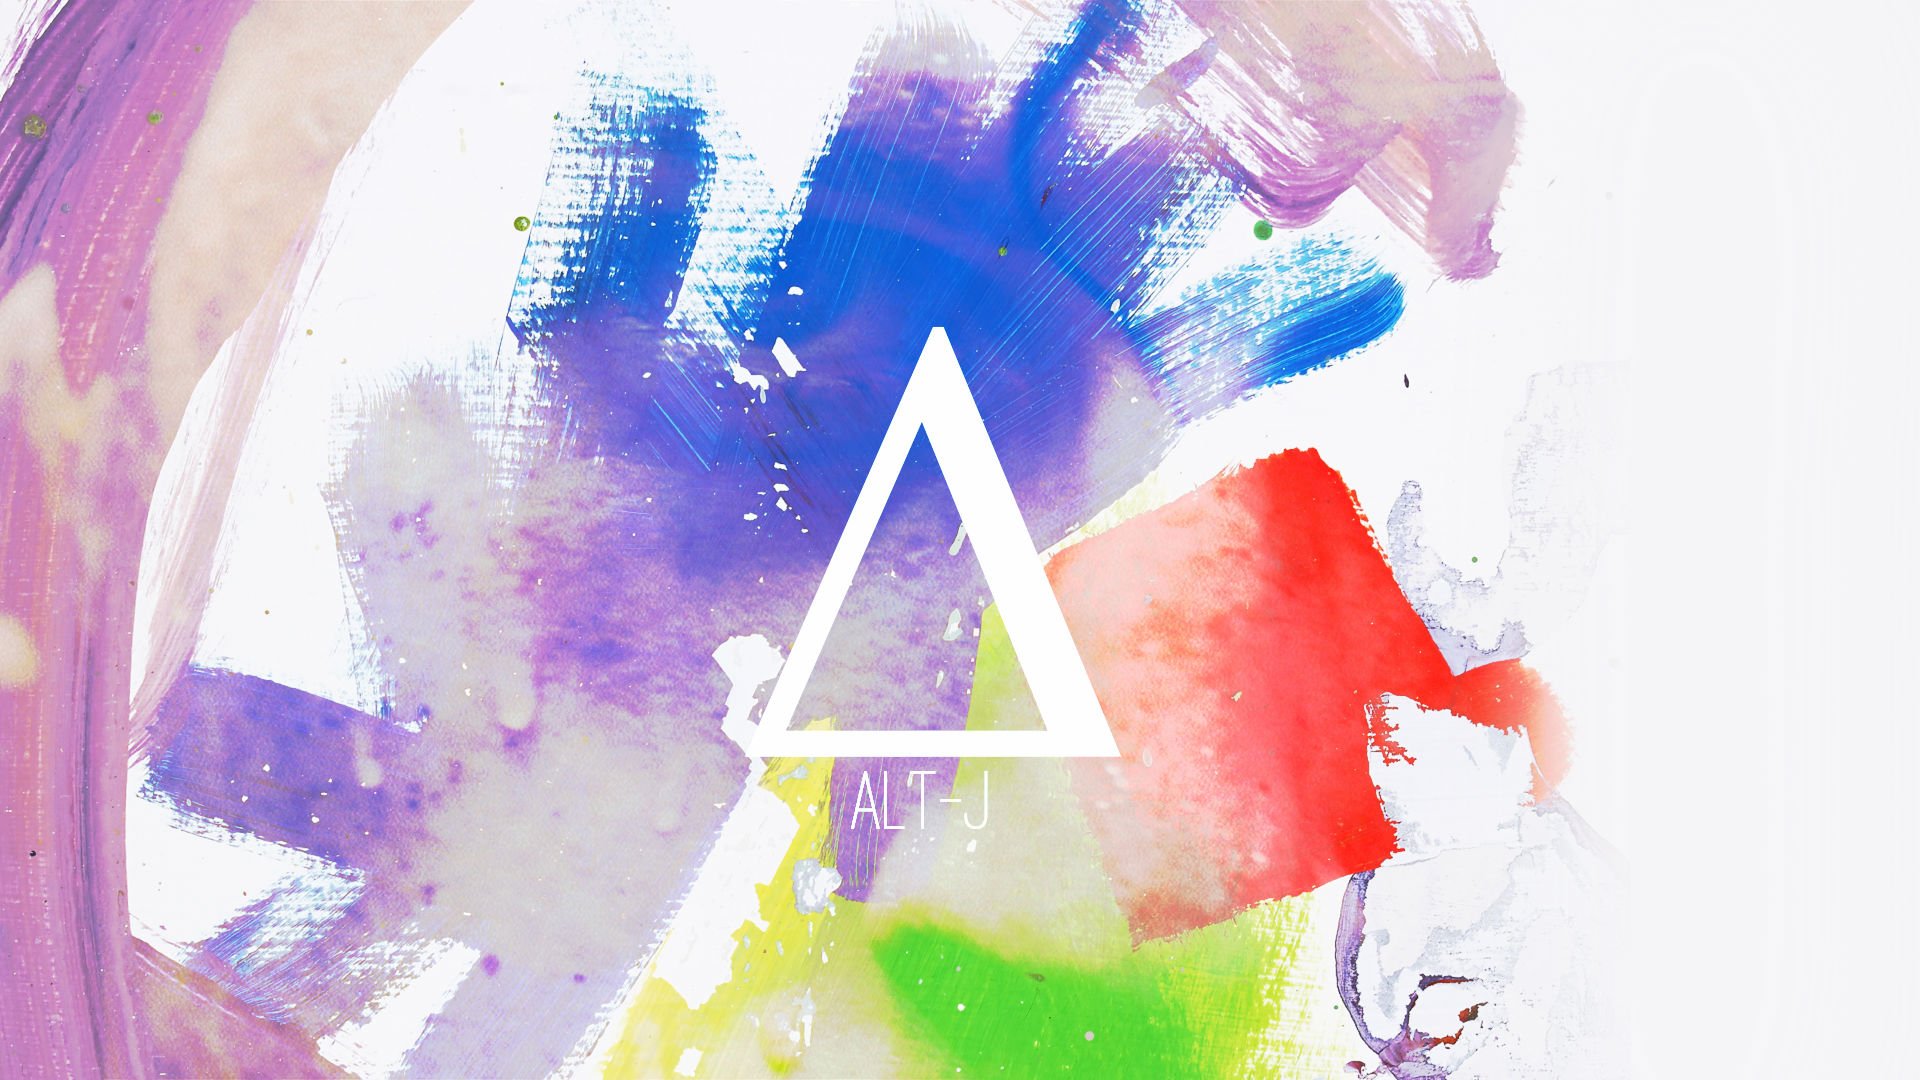 finally made some Alt J backgrounds You are welcome to use them